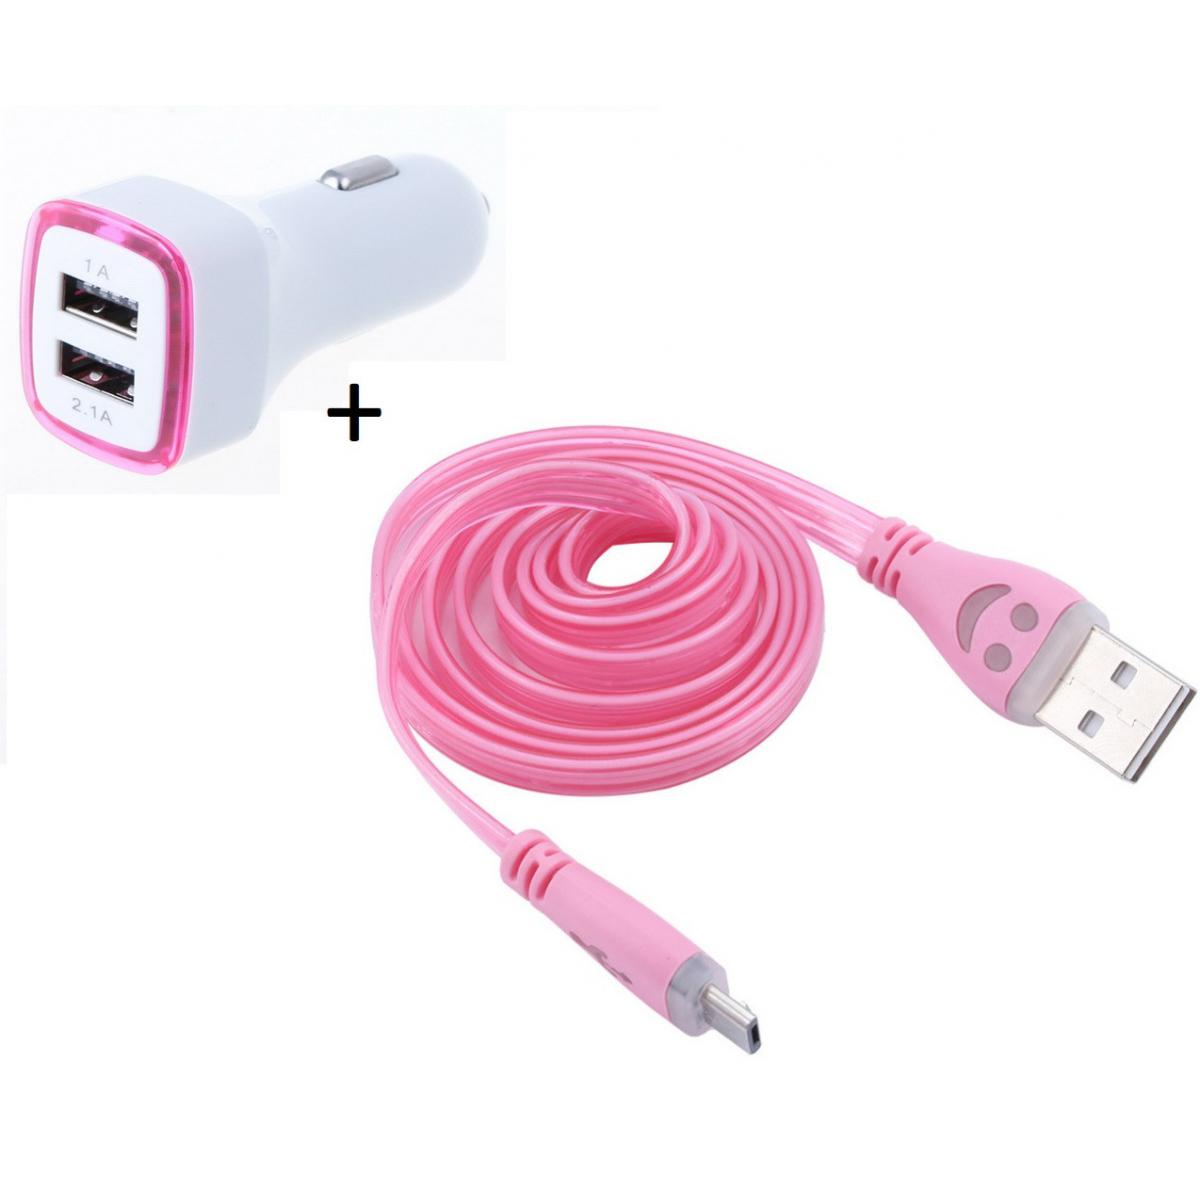 Shot - Pack Chargeur Voiture pour SAMSUNG Galaxy J6+ Smartphone Micro USB (Cable Smiley + Double Adaptateur LED Allume Cigare) (ROSE) - Chargeur Voiture 12V